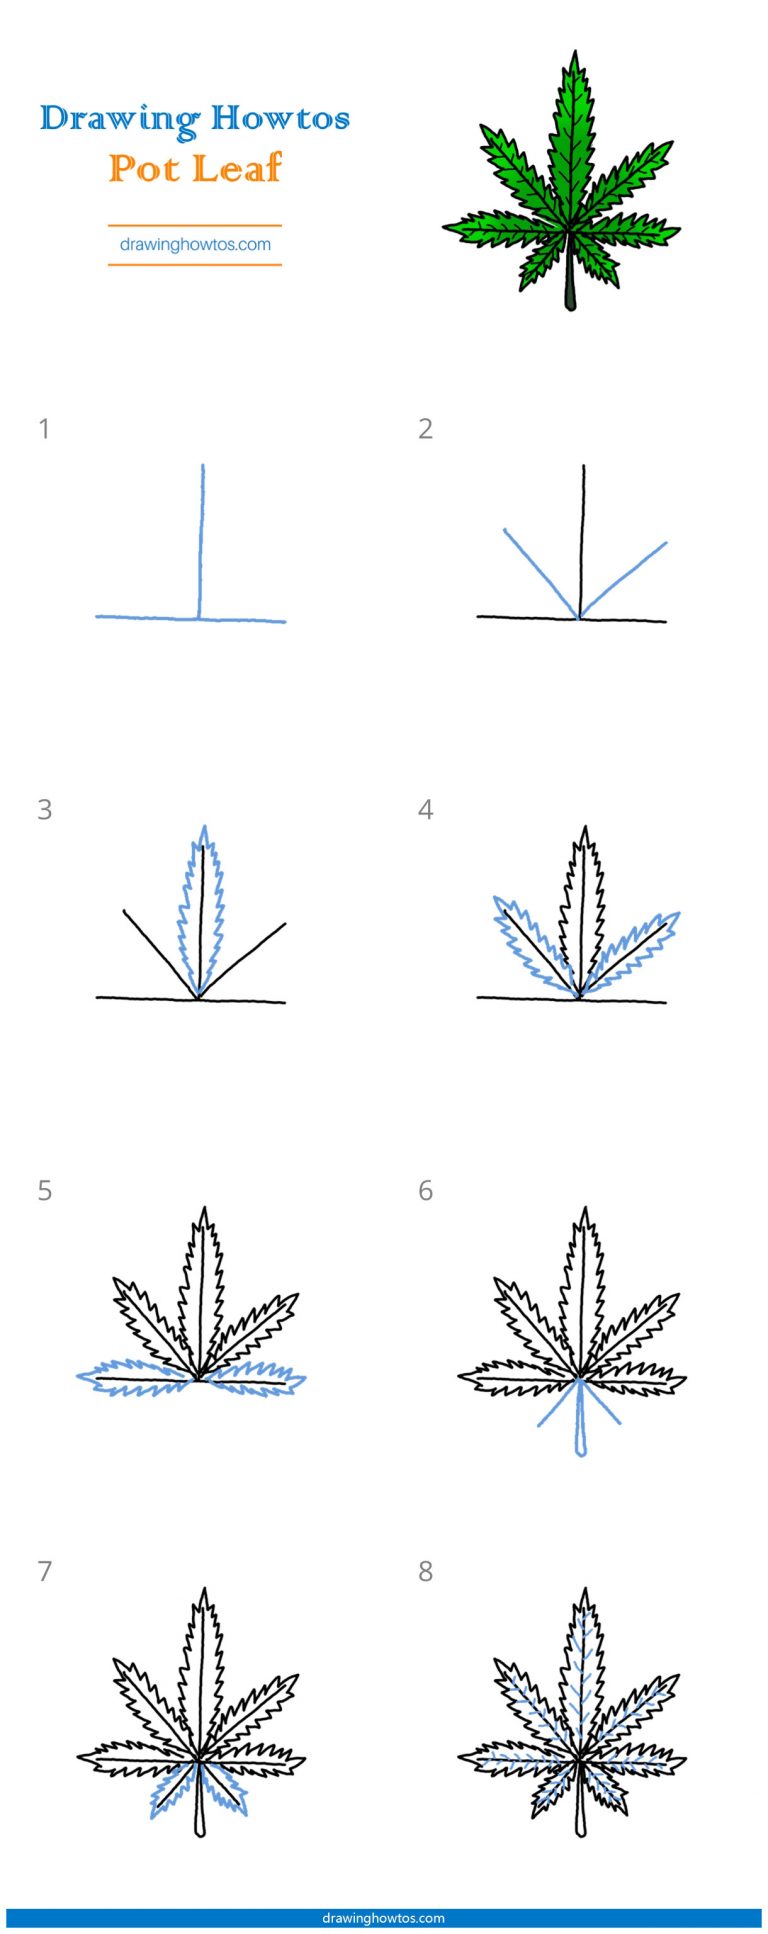 How to Draw a Pot Leaf Step by Step Easy Drawing Guides Drawing Howtos